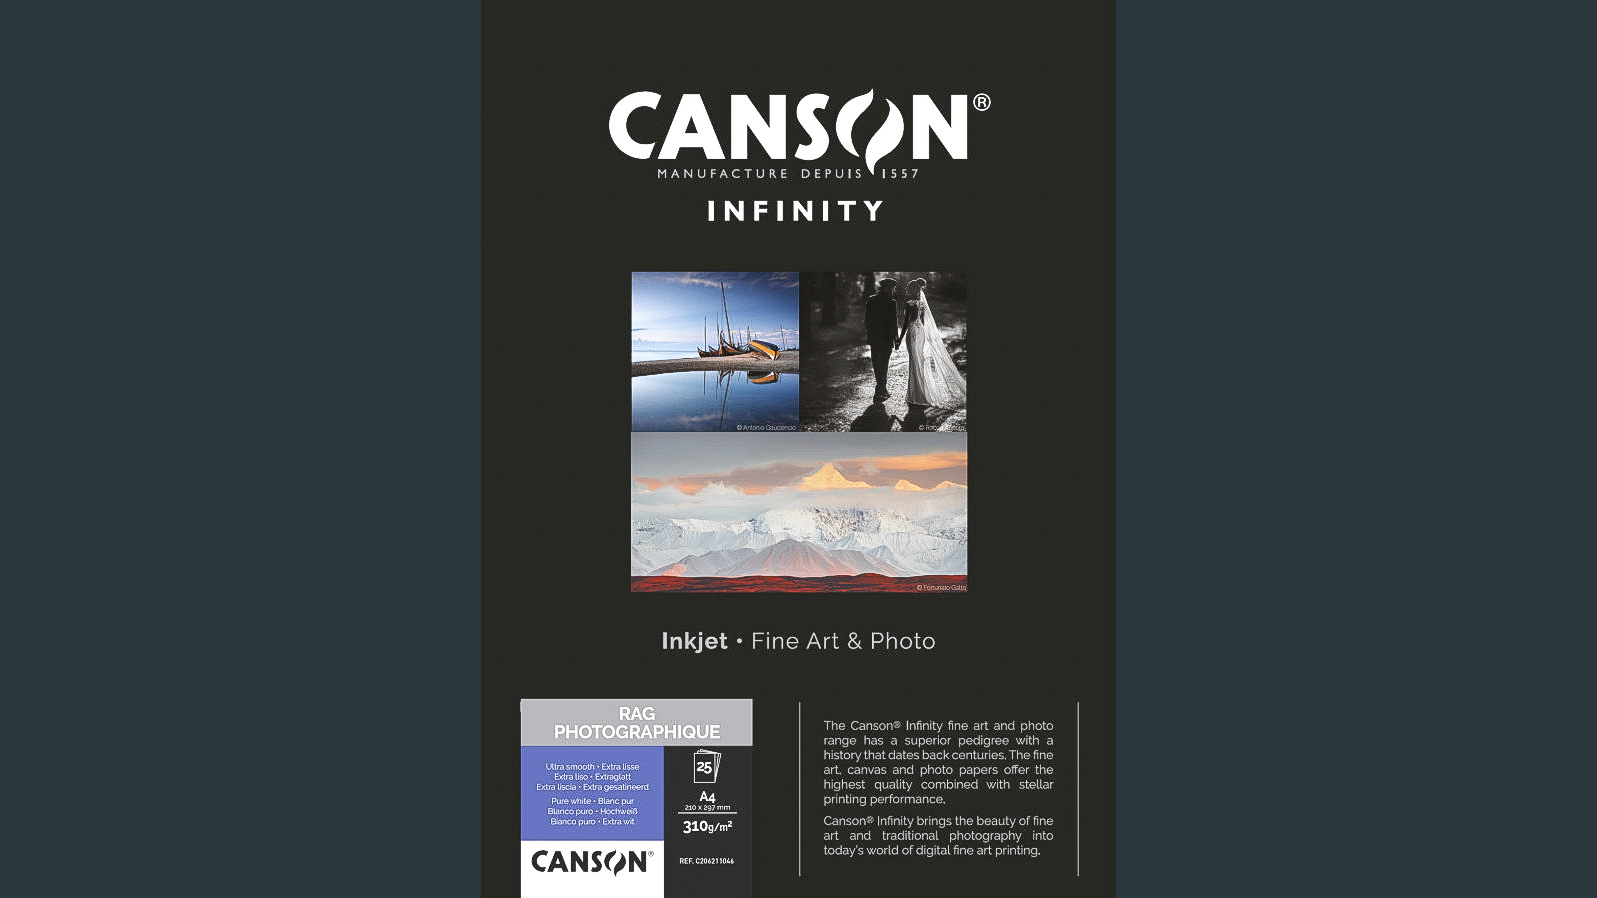 Canson Infinity Rag Photographique 310gsm, one of the best photo papers